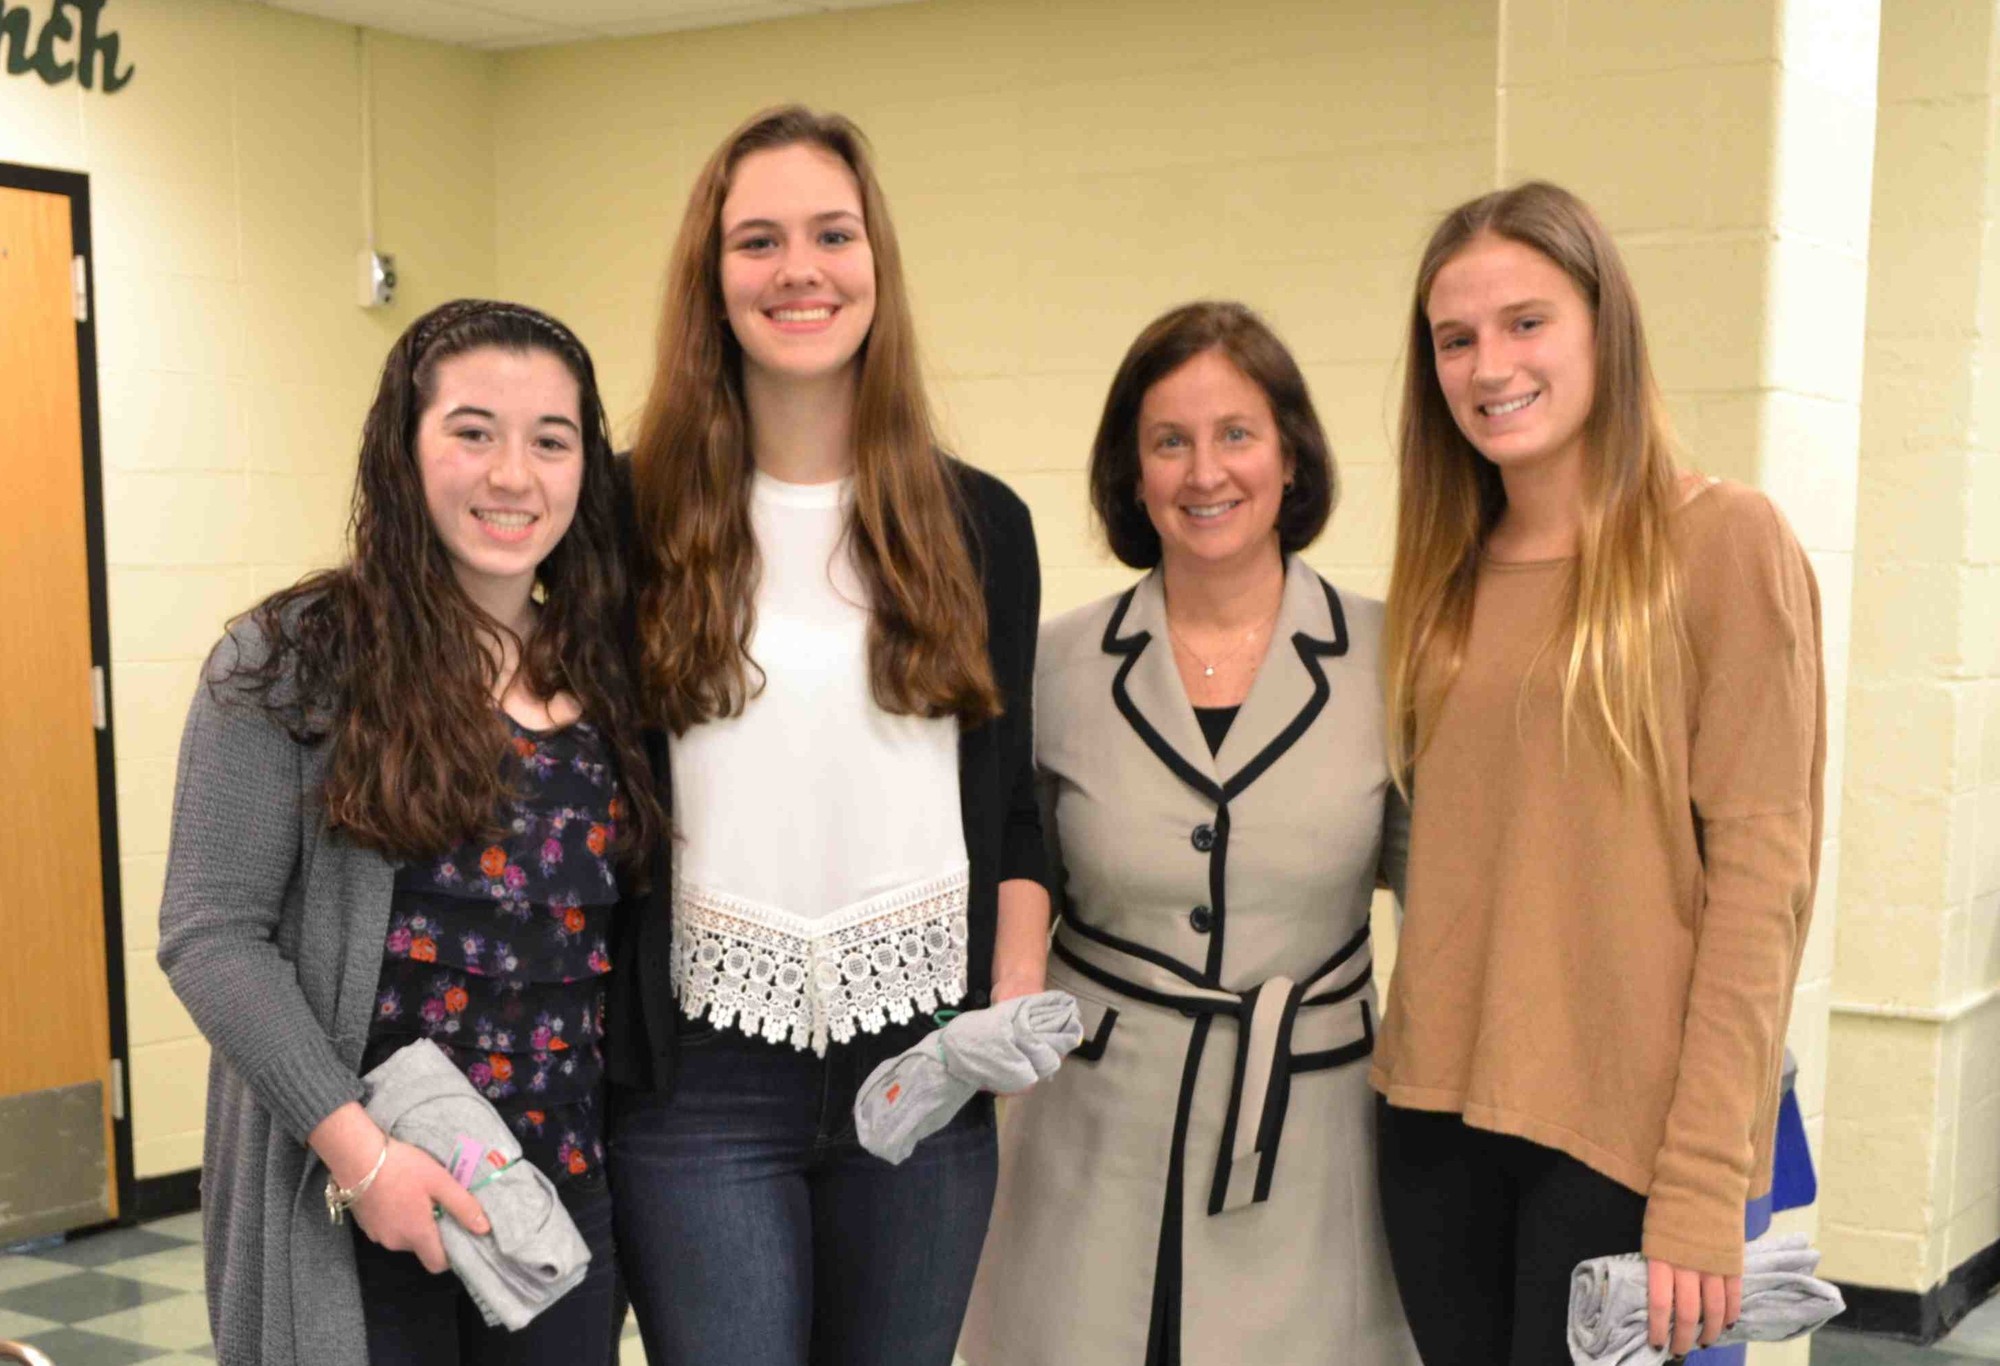 Dr. Burak honored Stephanie Milillo, Shannon Wren and Patty Loonie for their All-State athletic achievements.